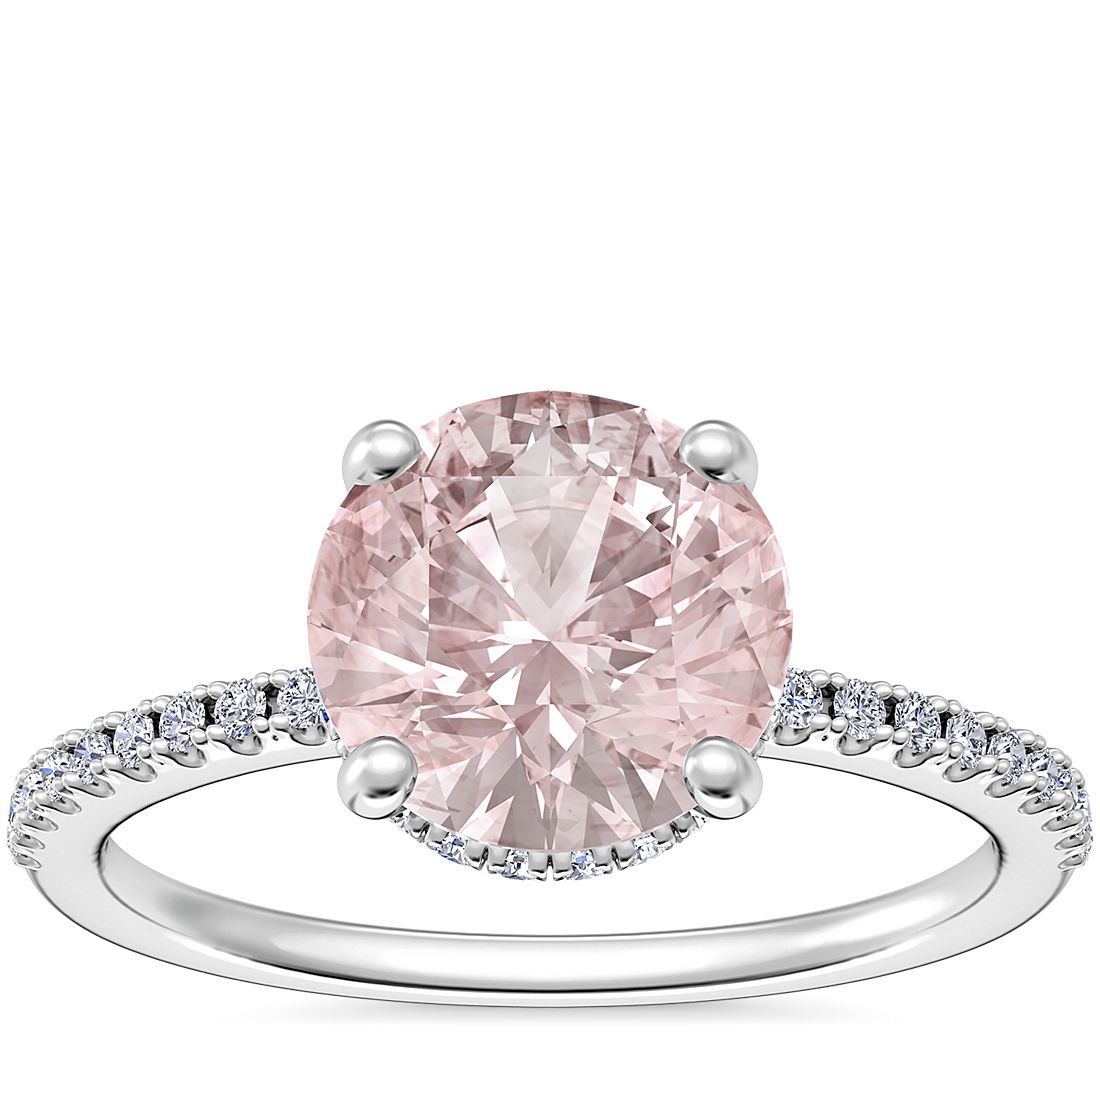 Petite Micropavé Hidden Halo Engagement Ring with Round Morganite in Platinum (8mm)